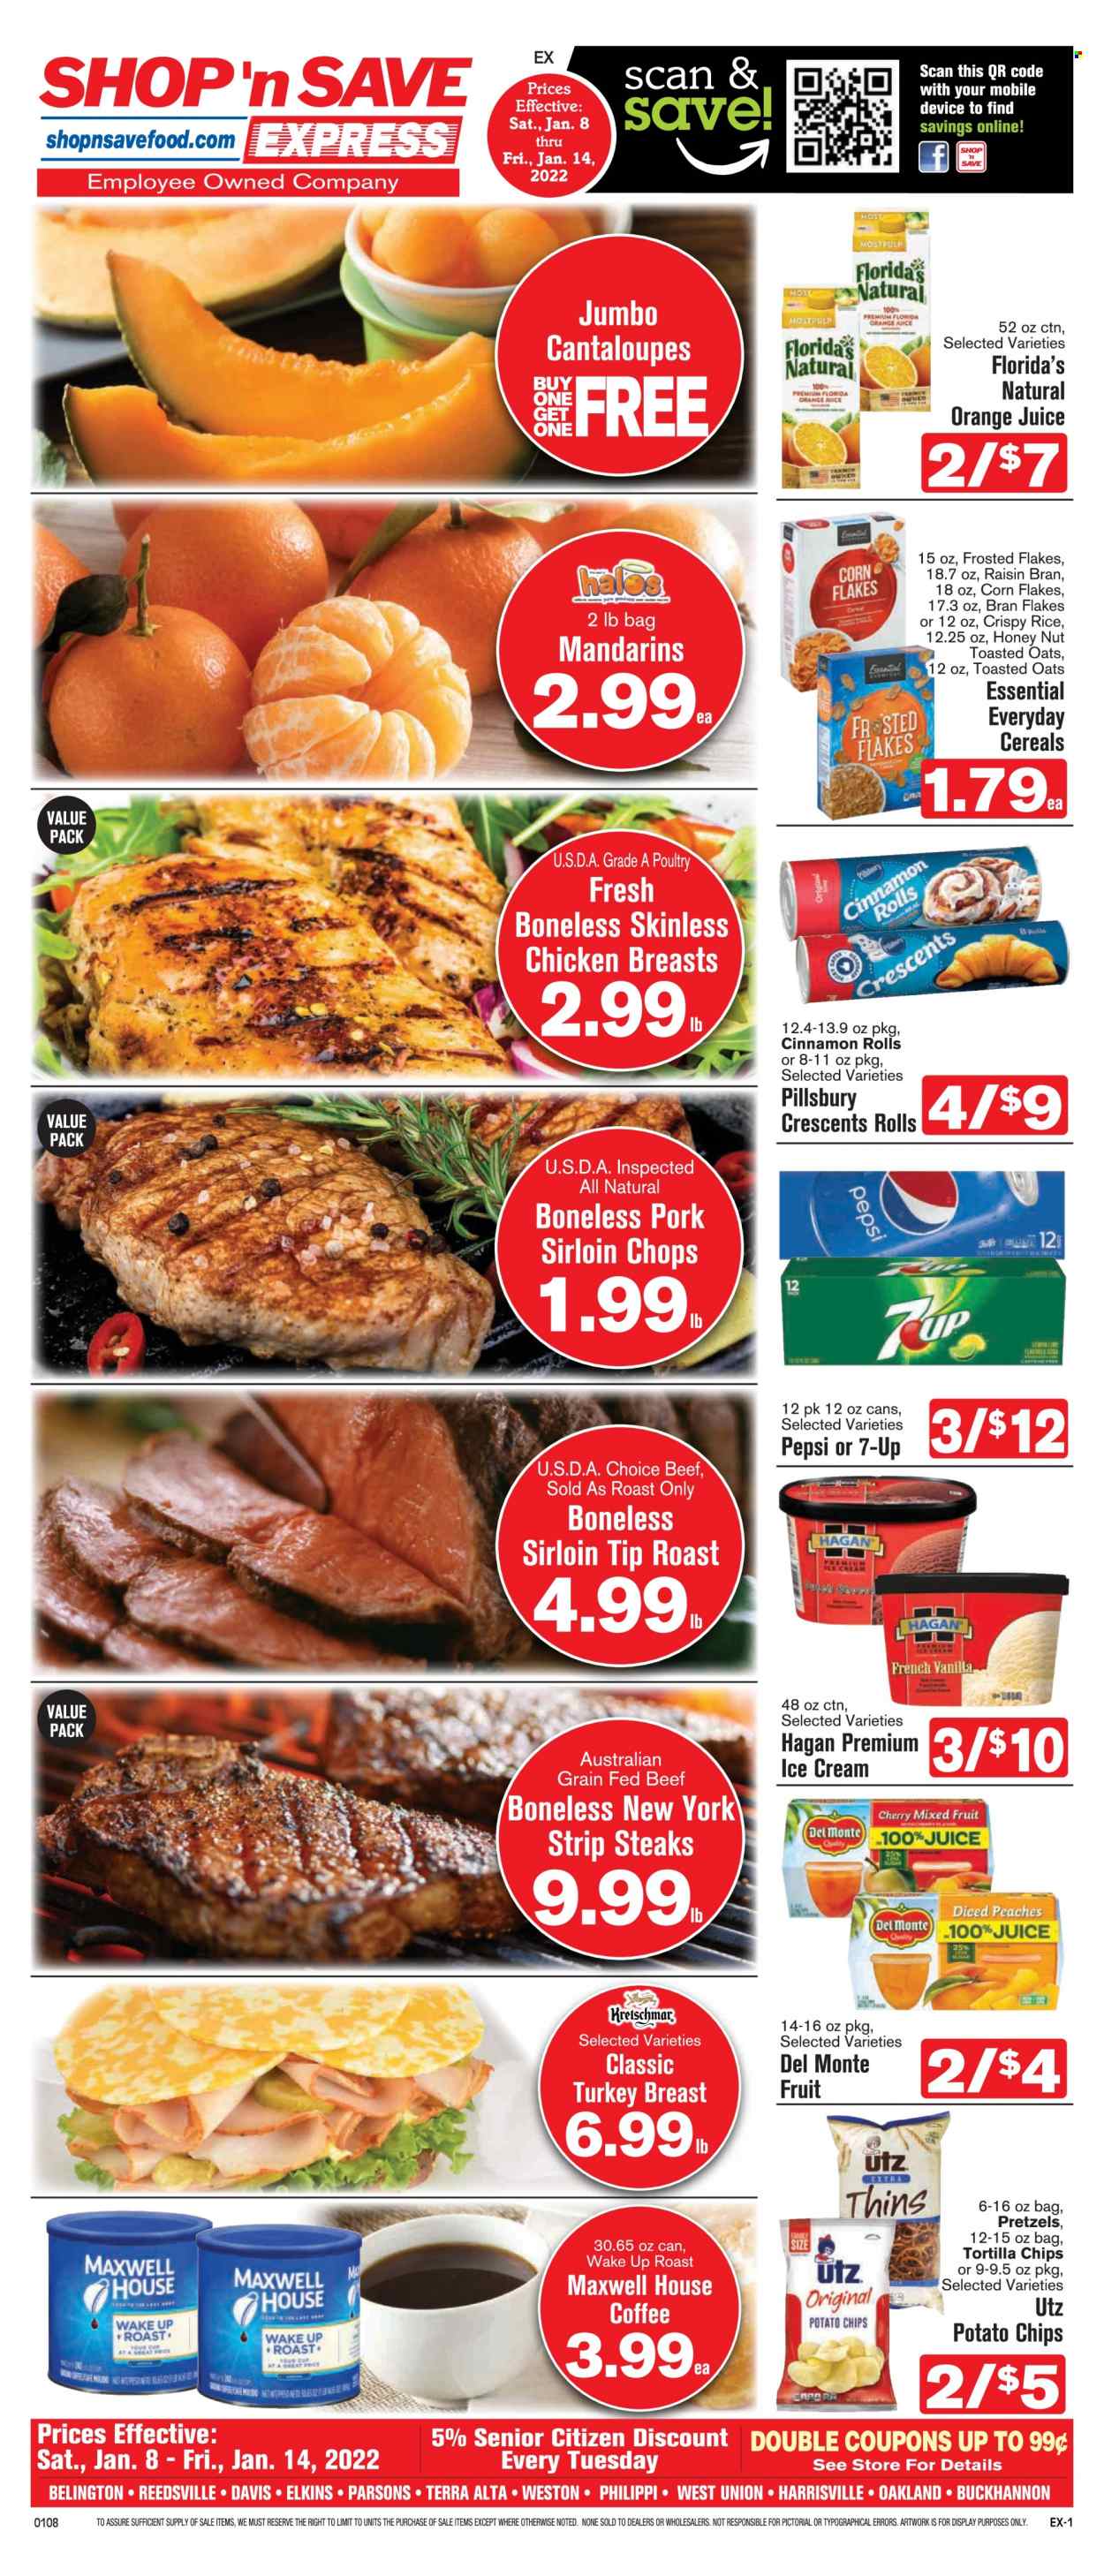 thumbnail - Shop ‘n Save Express Flyer - 01/08/2022 - 01/14/2022 - Sales products - pretzels, cinnamon roll, cantaloupe, mandarines, cherries, chicken breasts, beef meat, steak, striploin steak, pork loin, Pillsbury, ice cream, Florida's Natural, tortilla chips, potato chips, chips, Thins, cereals, corn flakes, bran flakes, Frosted Flakes, Raisin Bran, toasted oats, Pepsi, orange juice, juice, 7UP, Maxwell House, coffee. Page 1.